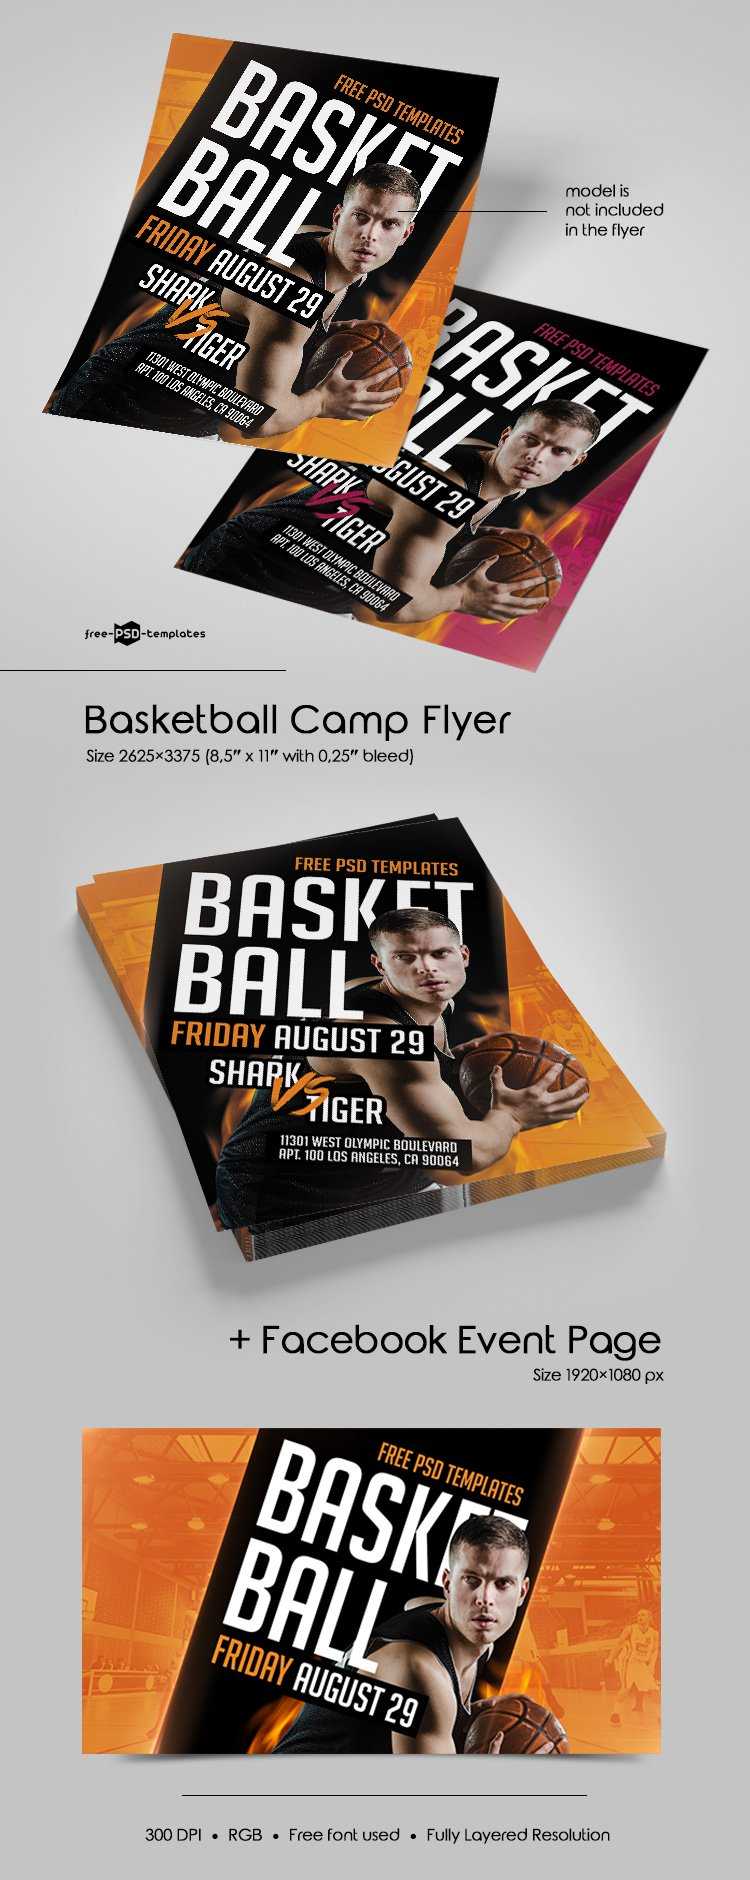 Free Basketball Camp Flyer In Psd | Free Psd Templates Regarding Basketball Camp Brochure Template